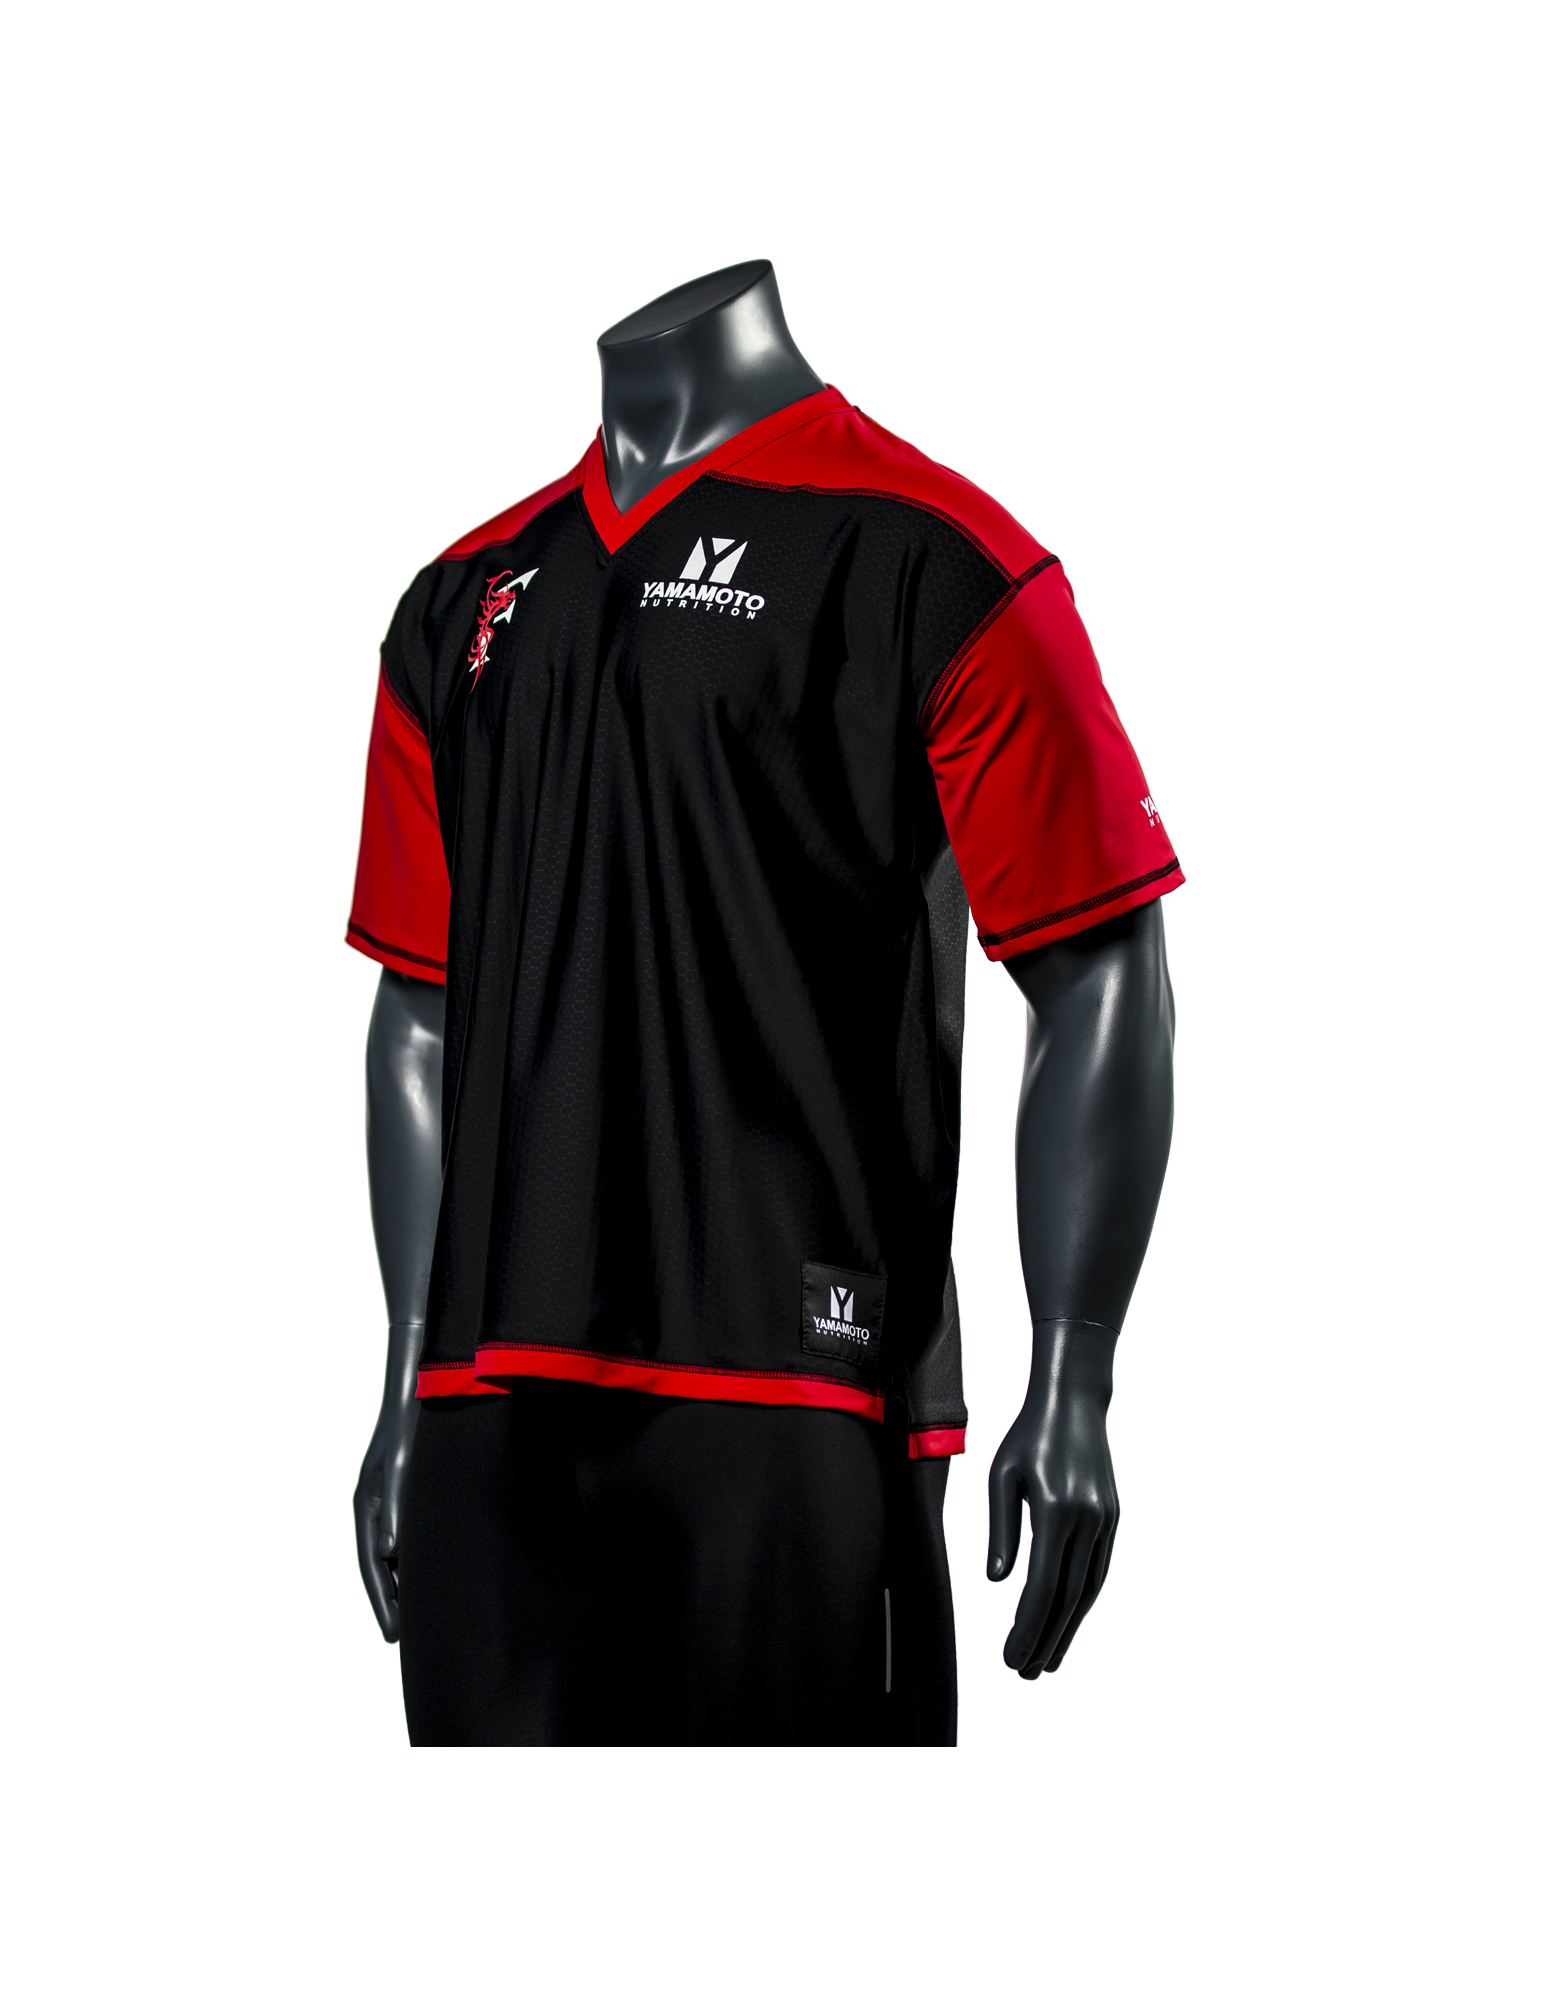 black and red football jersey